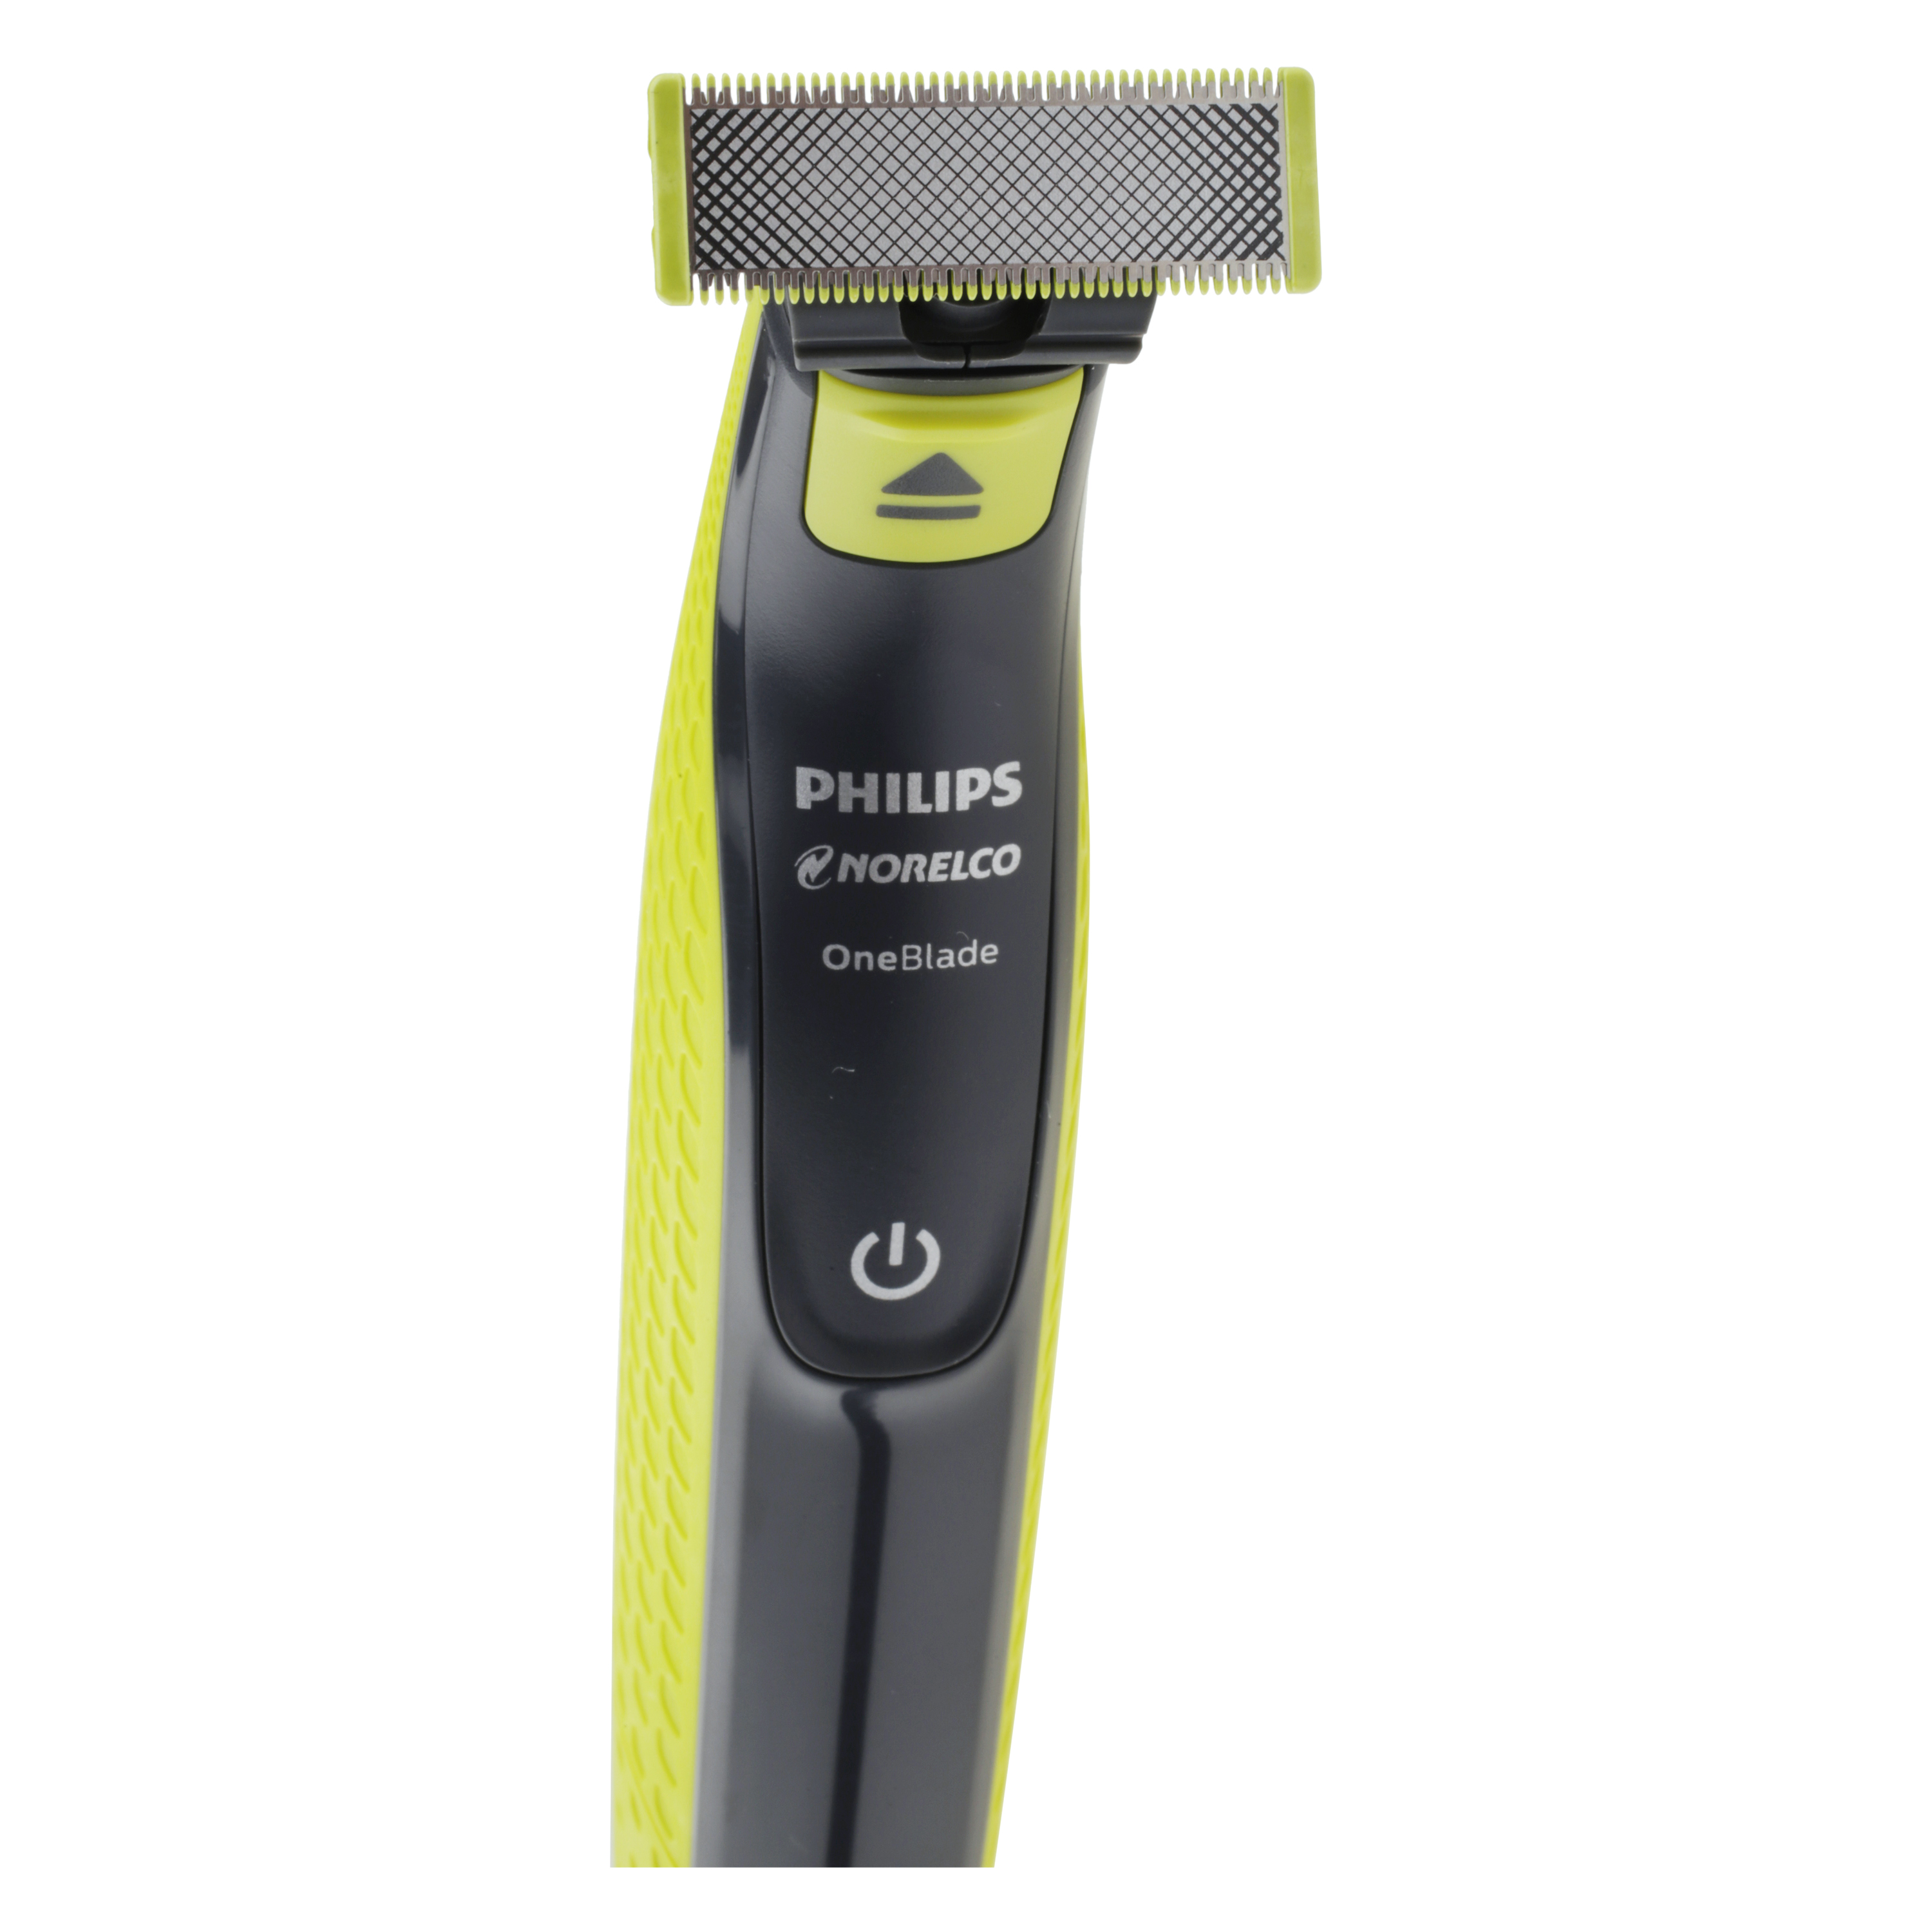 Philips Norelco OneBlade w Blade, QP2520/72 - image 2 of 6